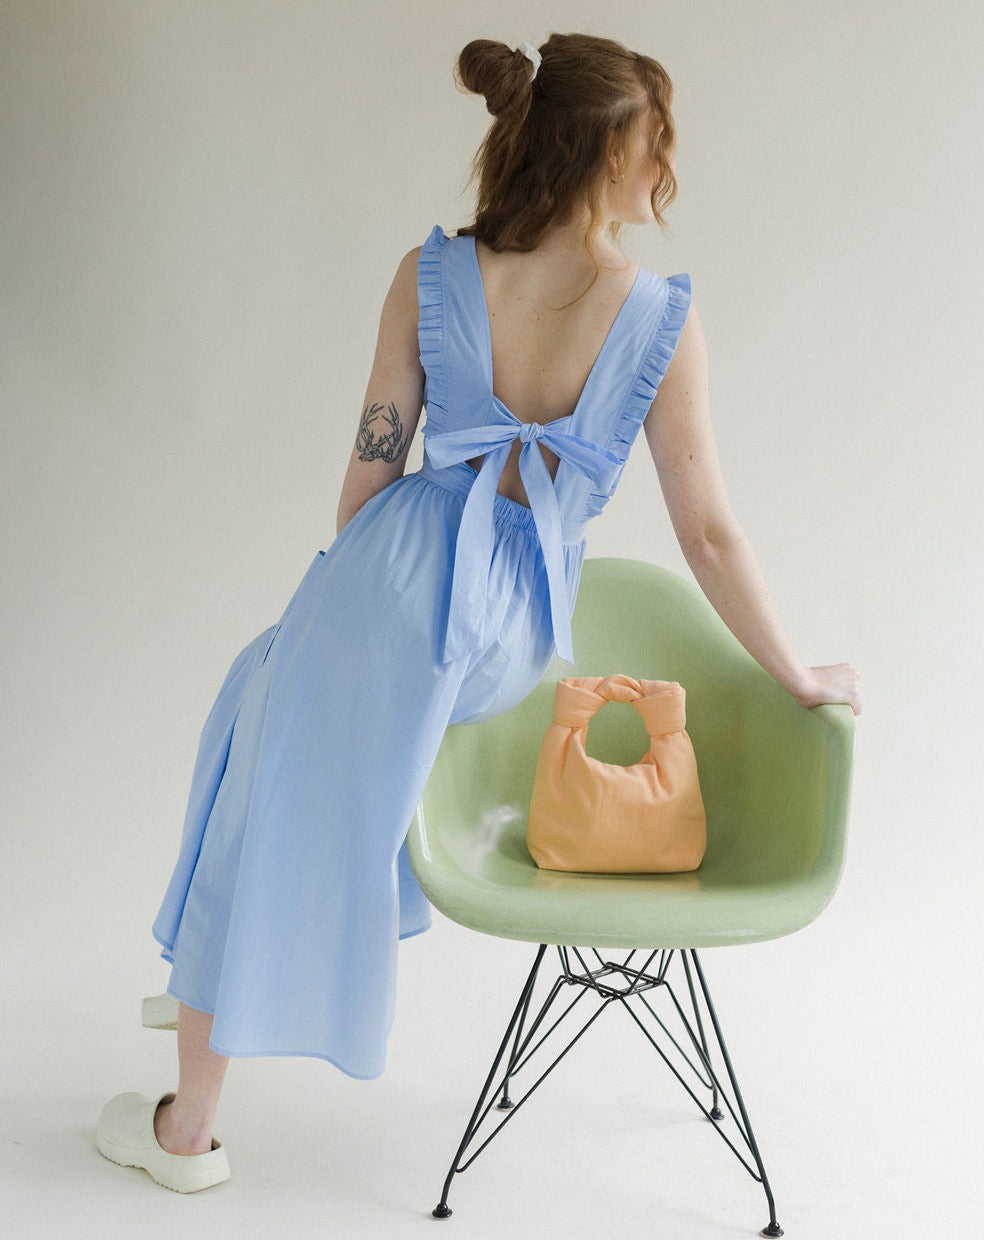 Light blue coloured apron dress with pockets, defined waist band, large straps at back to tie as bow detail, ruffled shoulder straps, and square neckline